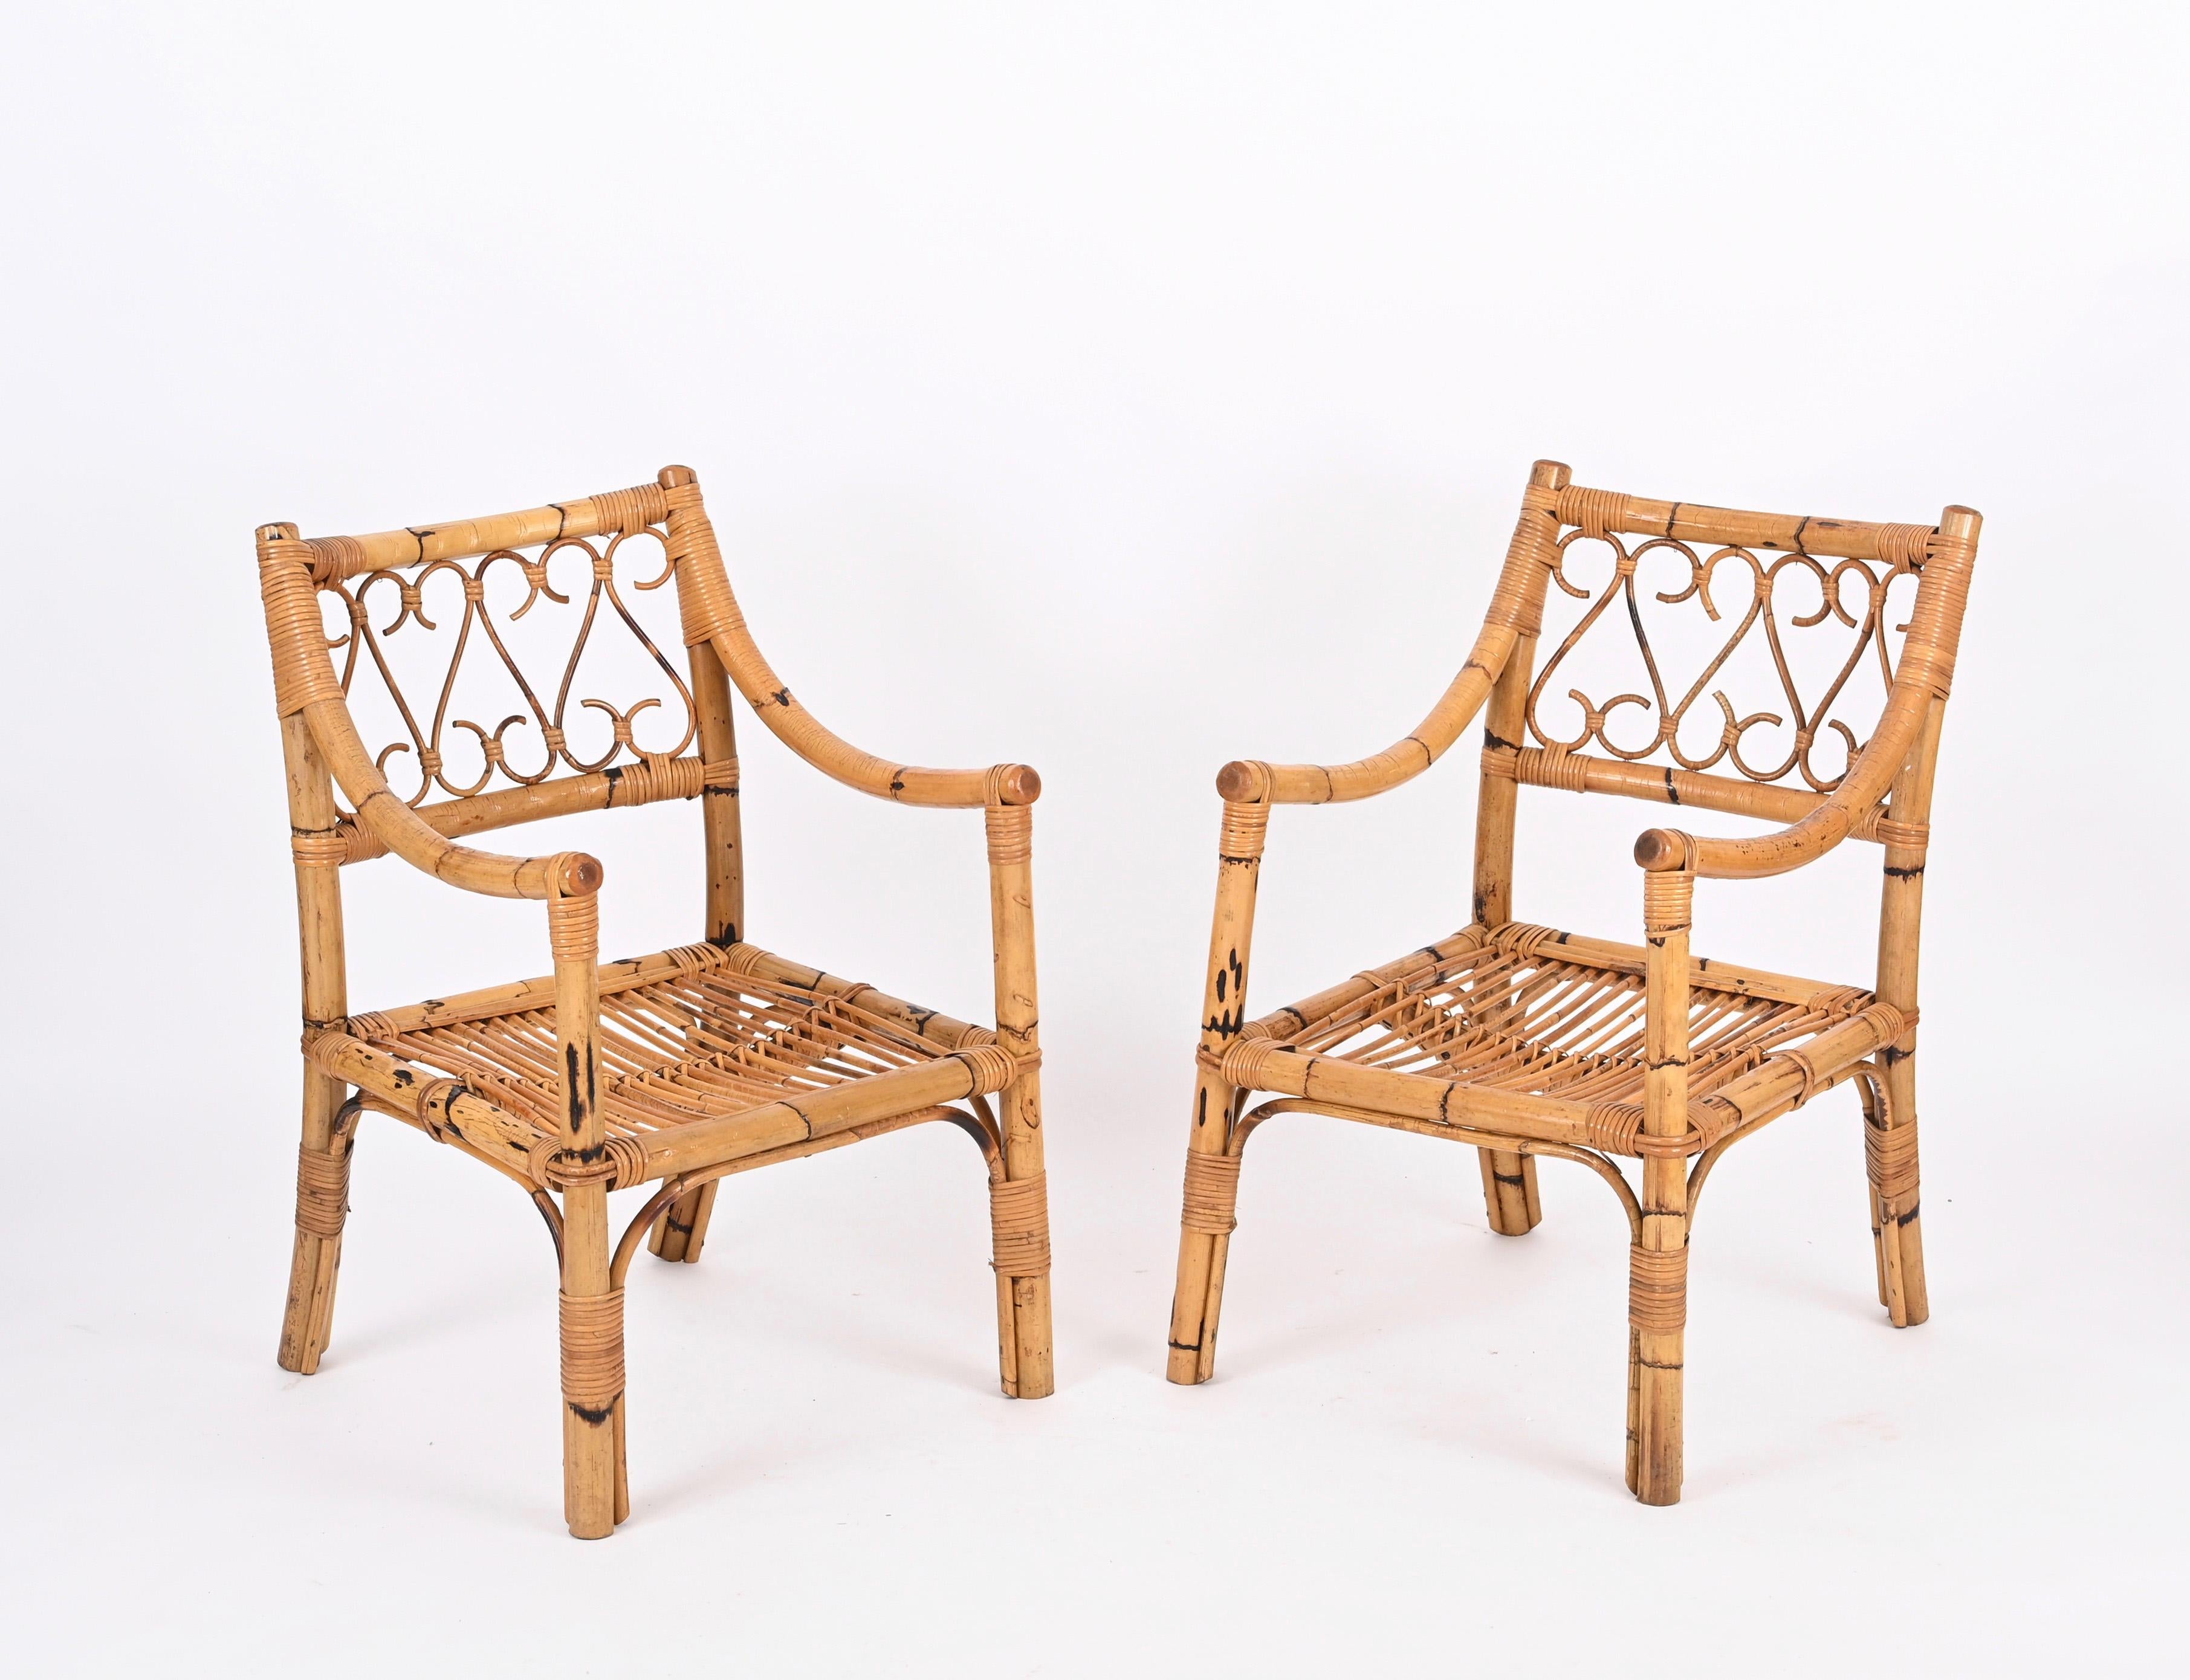 Pair of Vivai del Sud Mid-Century Armchairs in Bamboo and Rattan, Italy 1970s For Sale 8